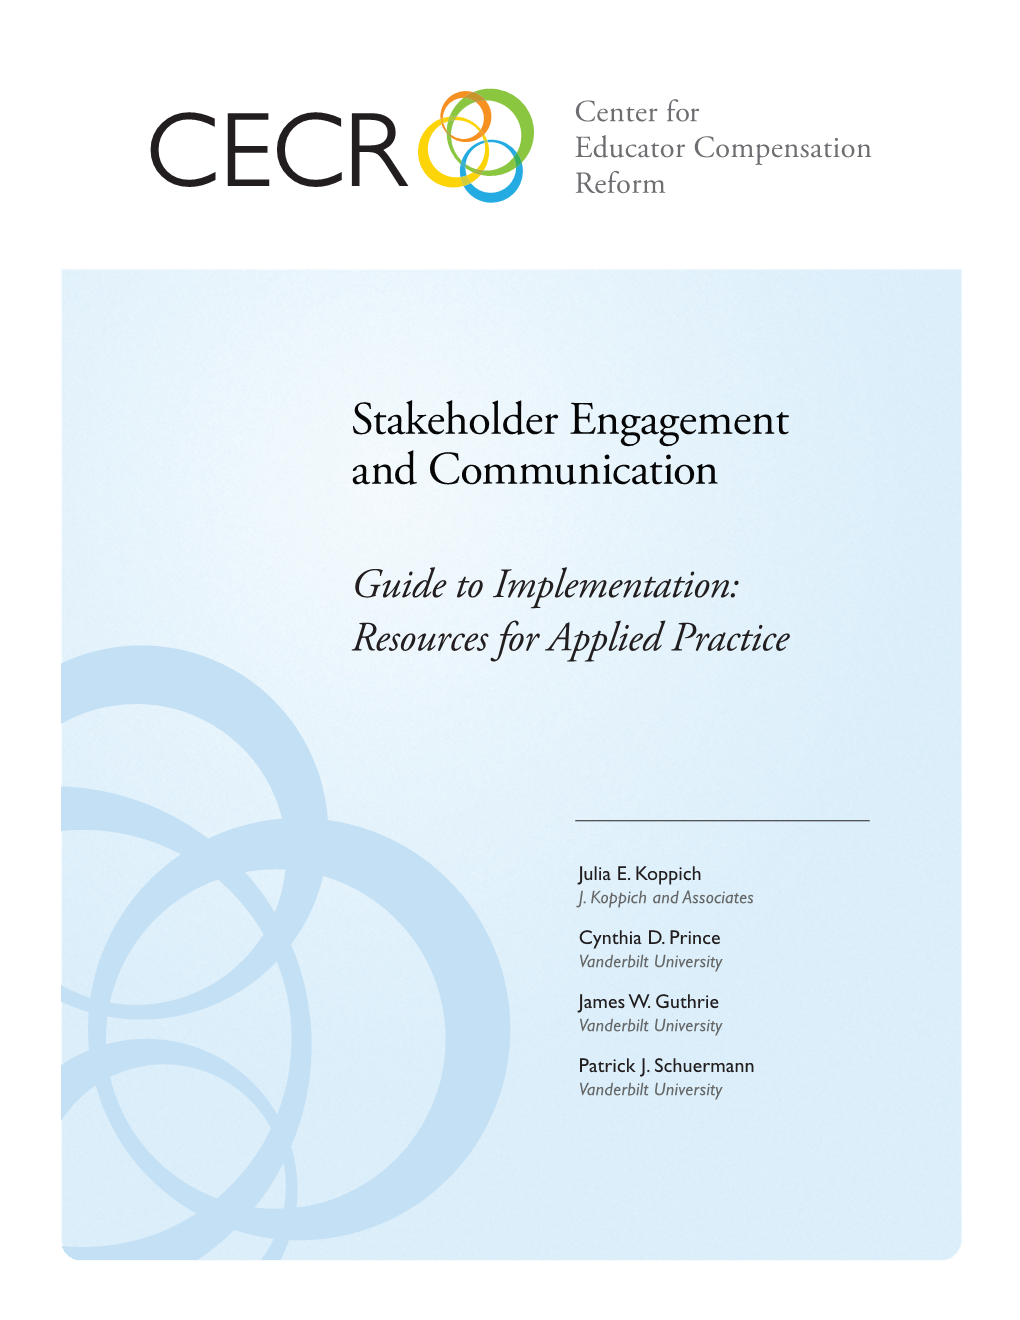 Stakeholder Engagement and Communication